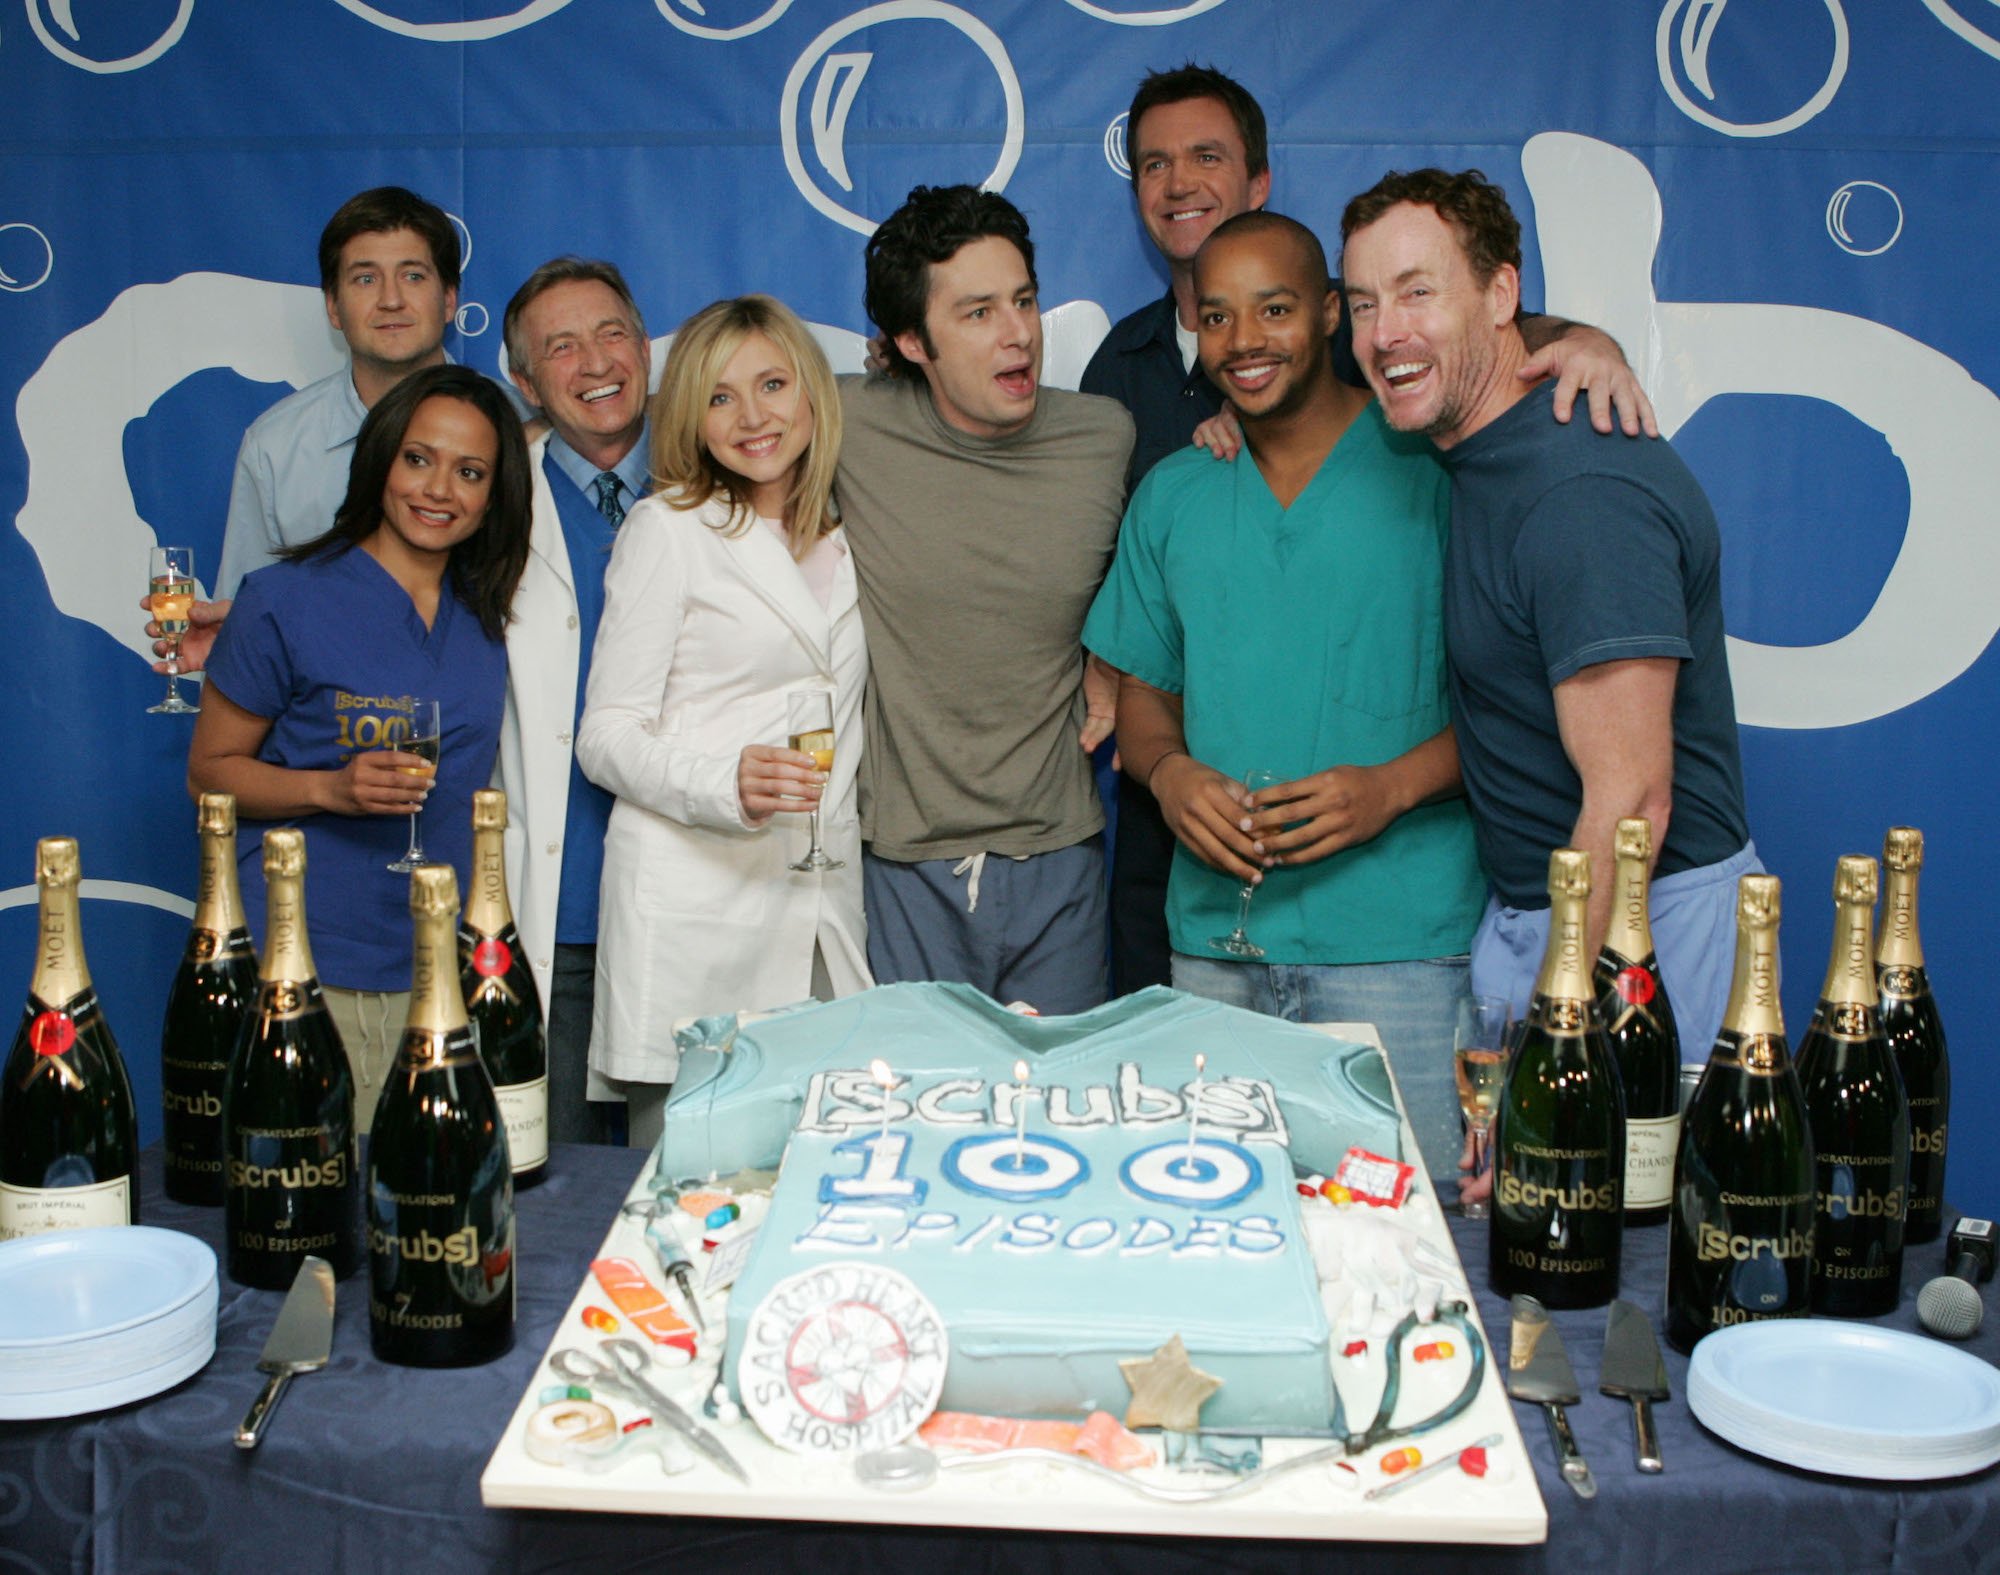 (L-R) Judy Reyes, producer Bill Lawrence, Ken Jenkins, Sarah Chalke, Zach Braff, Neil Flynn, Donald Faison and John C. McGinley smiling in front of a cake celebrating the 100th episode